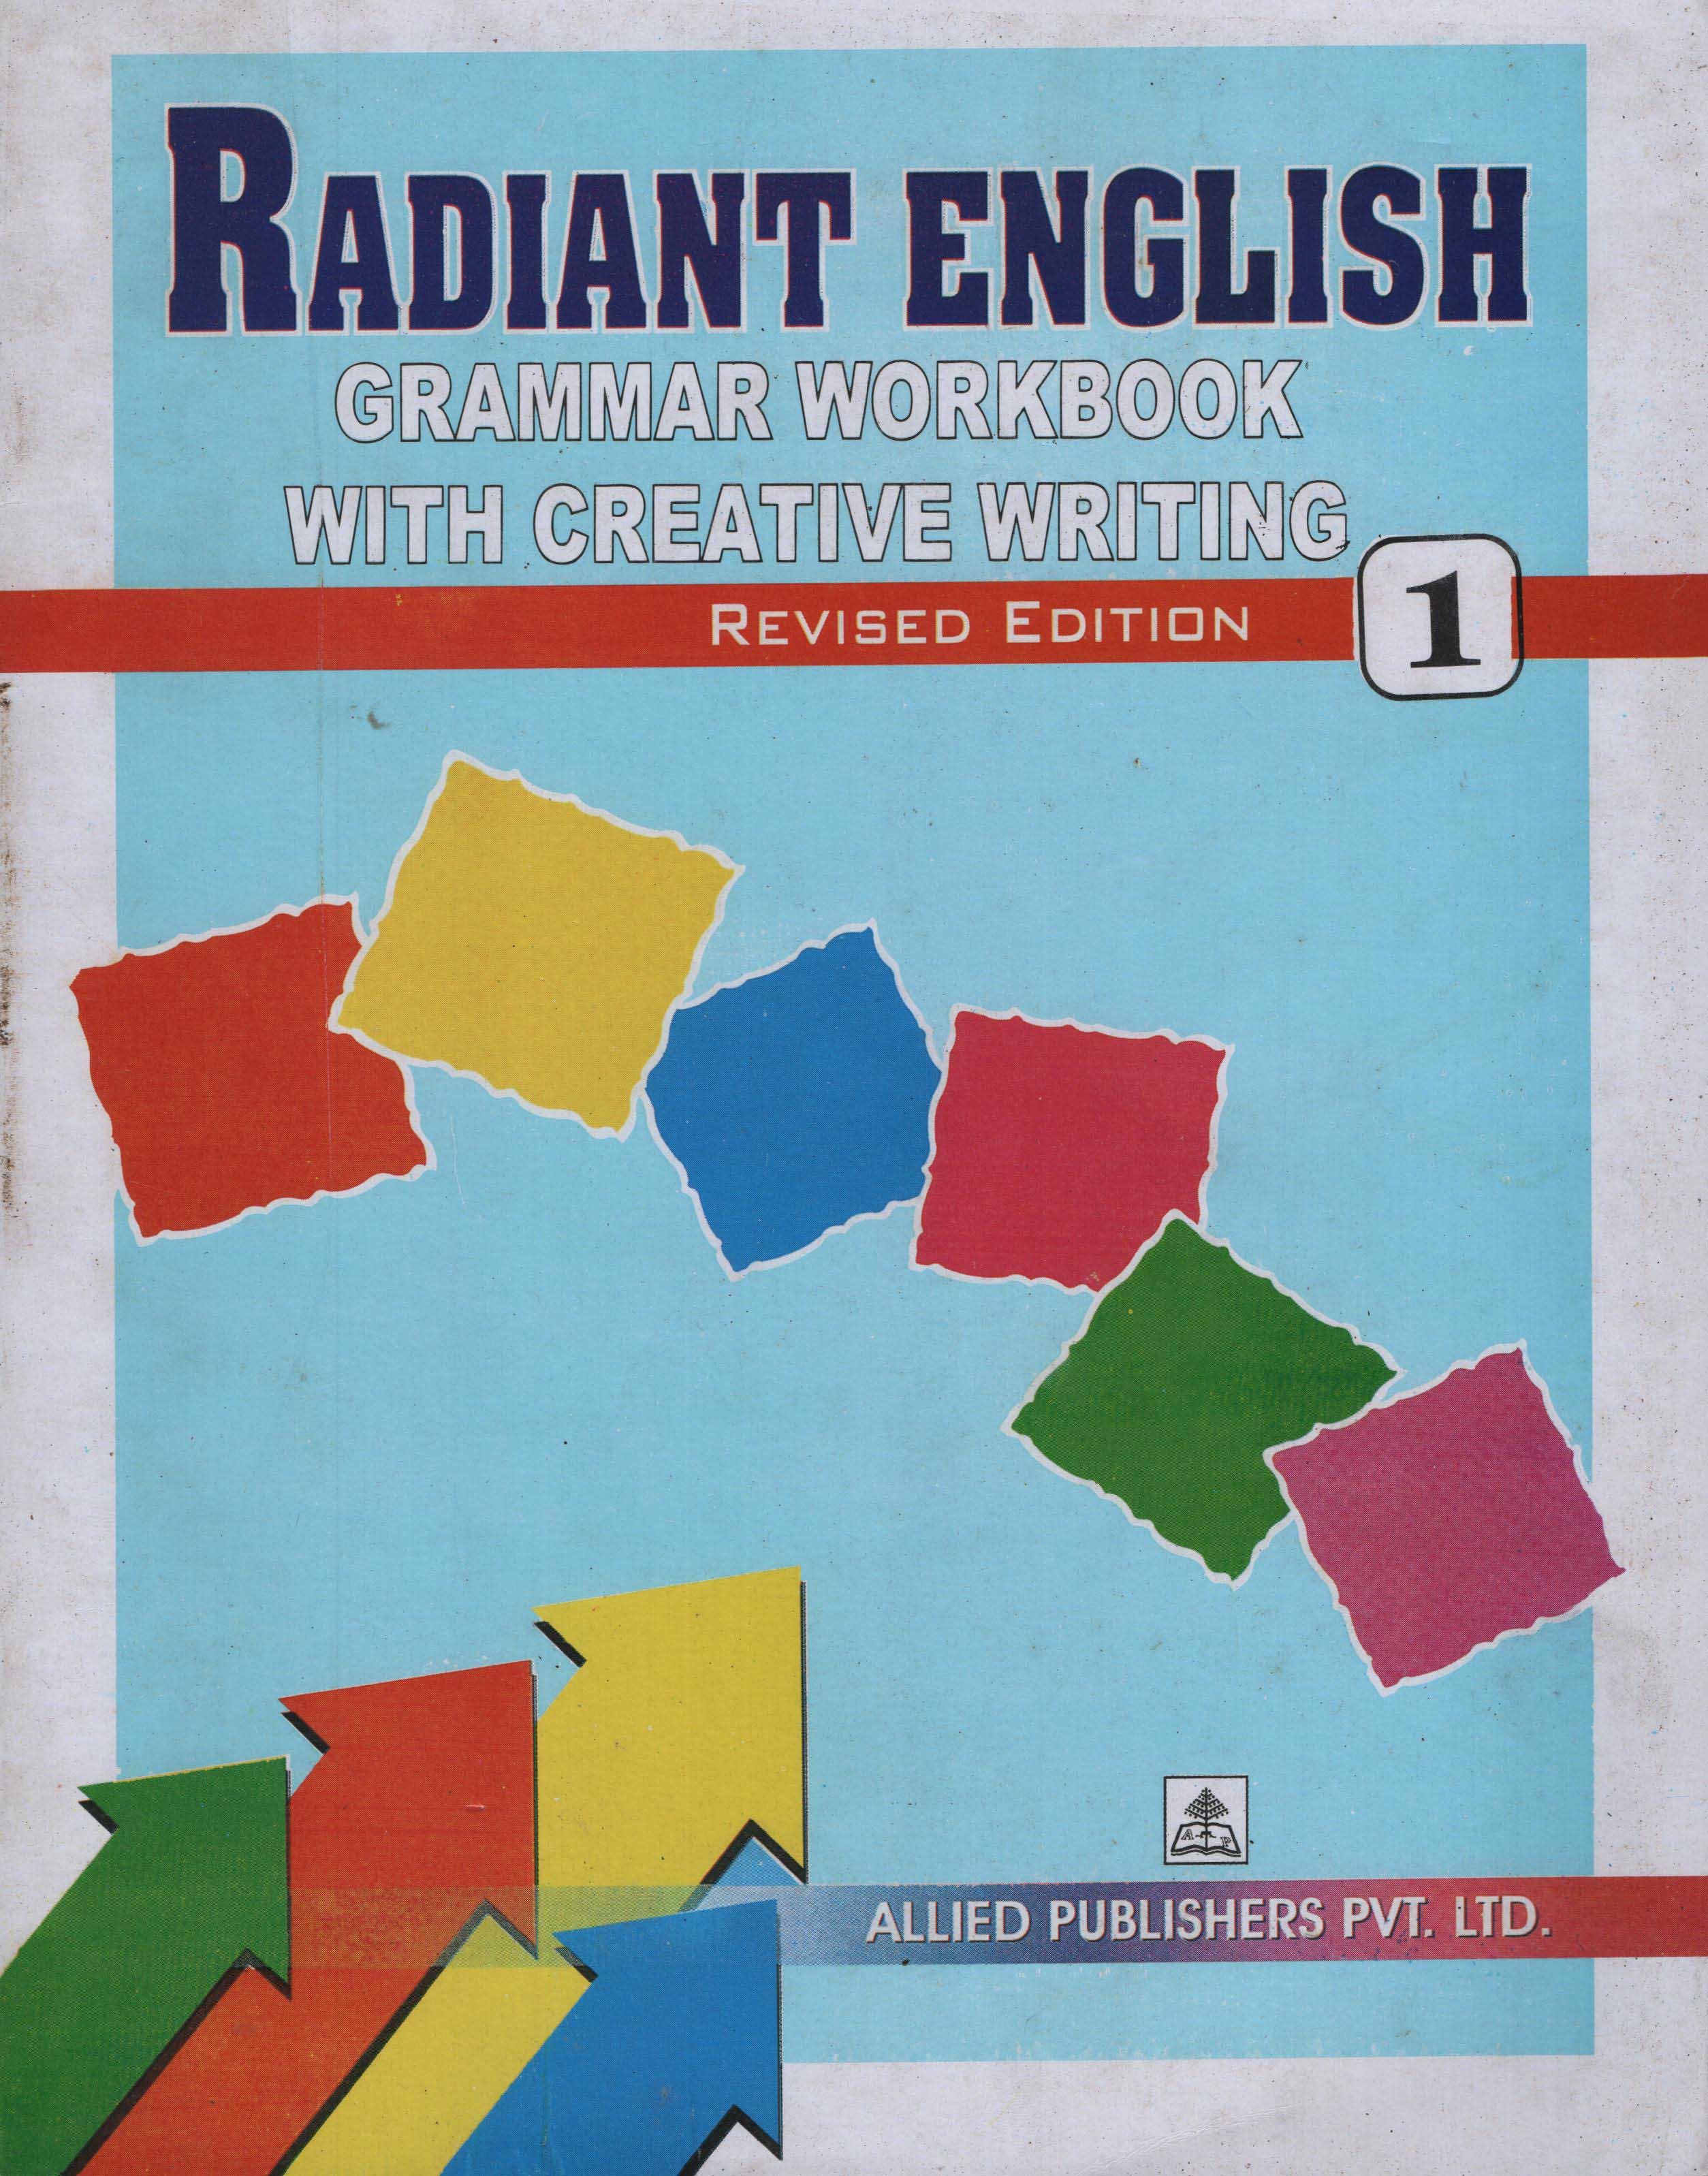 Radiant English Grammar Workbook with Creative Writing 1 (Revised Edition)